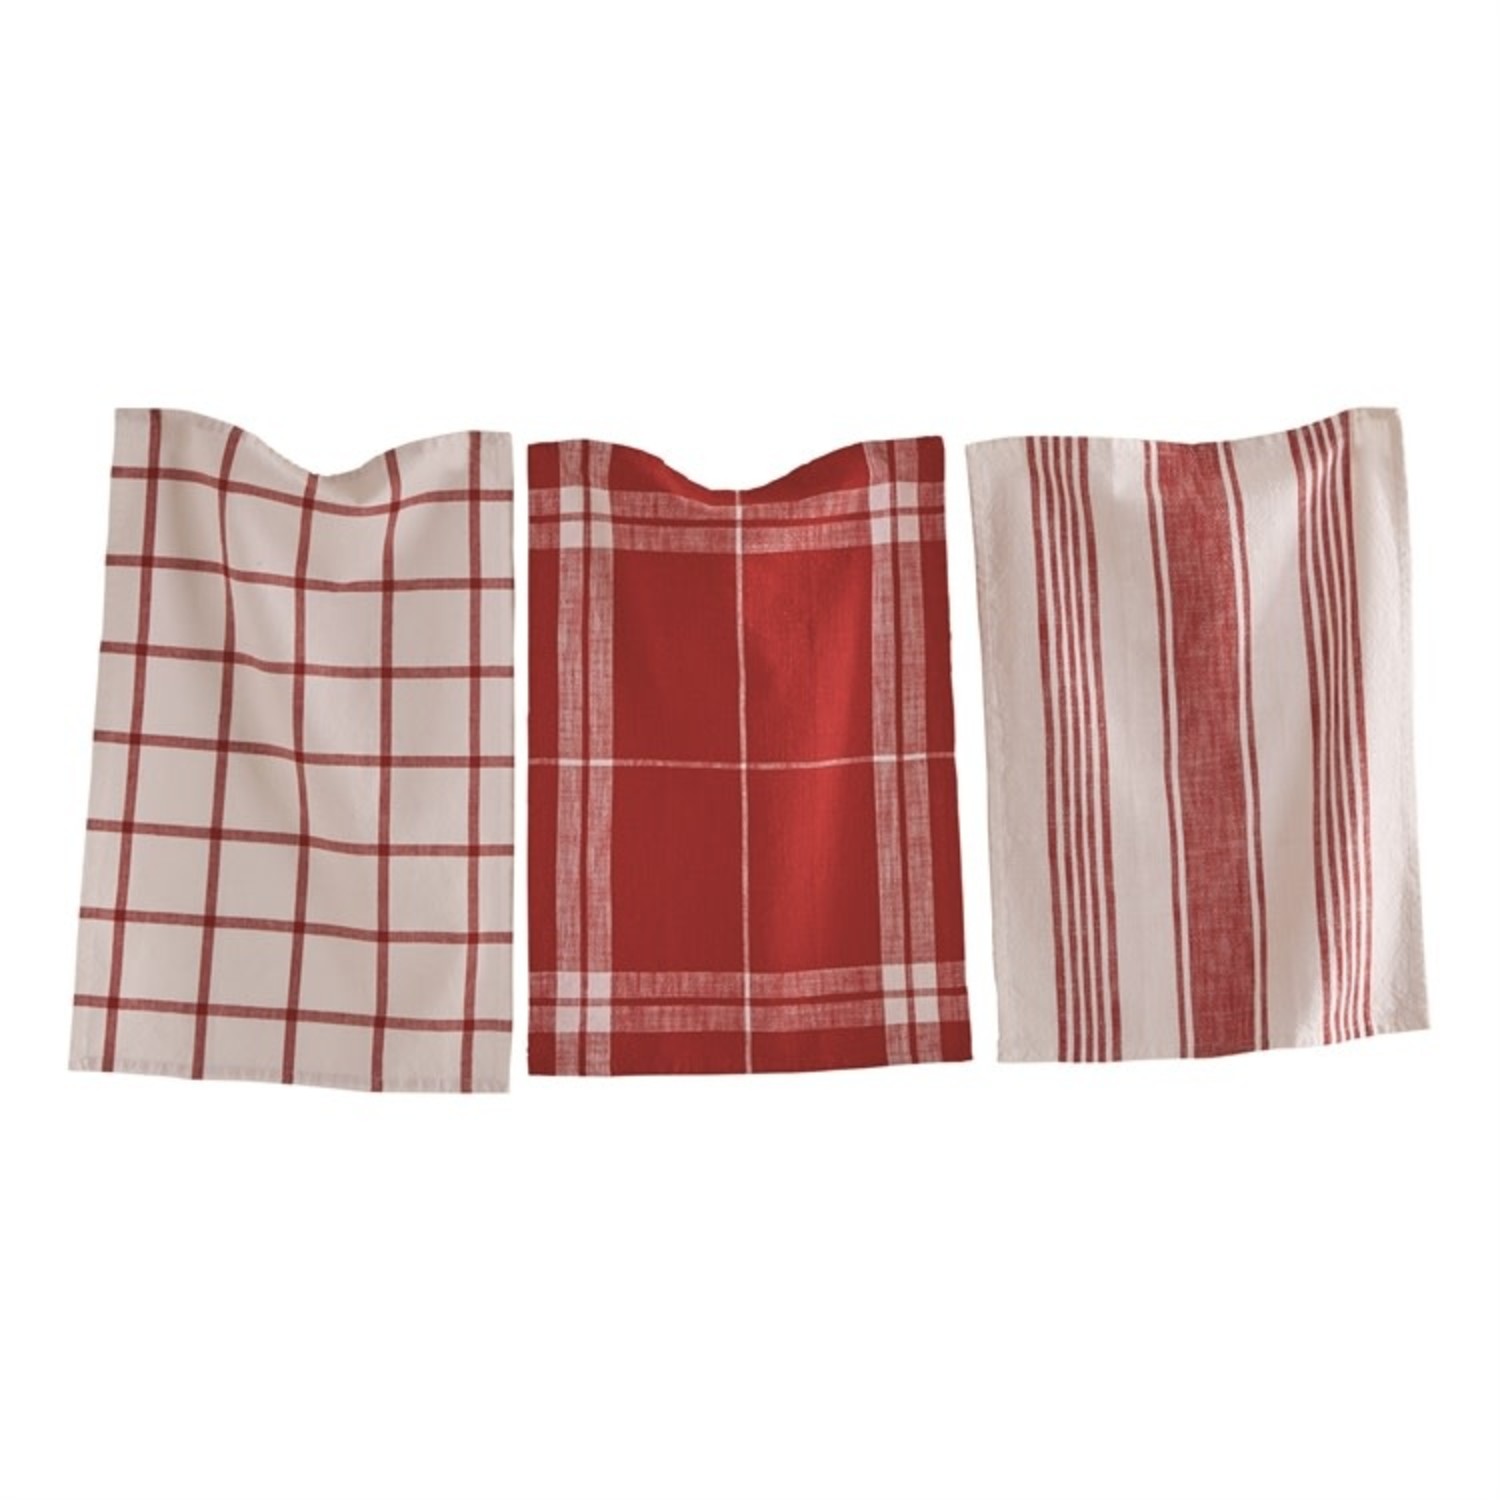 dishtowels s/3, classic red - Whisk